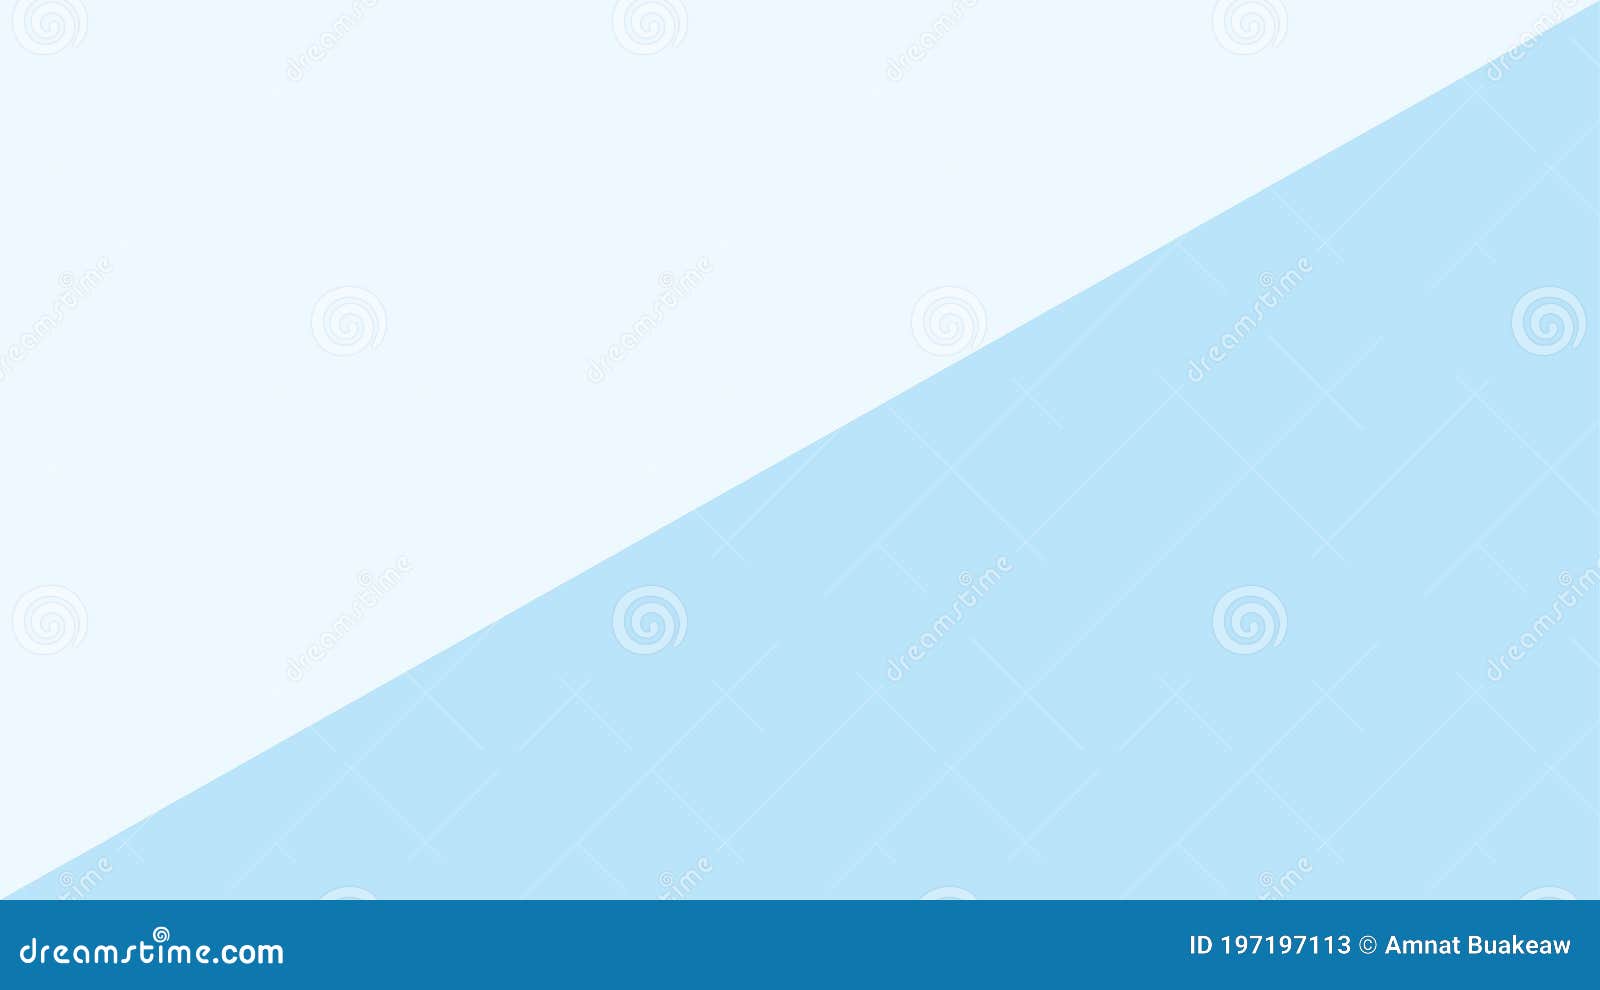 Light Blue Color Two Tone Pastel Soft For Background Simple Blue Pastel In Top View Minimalism Flat Soft Color For Banner Stock Vector Illustration Of Fashion Frame